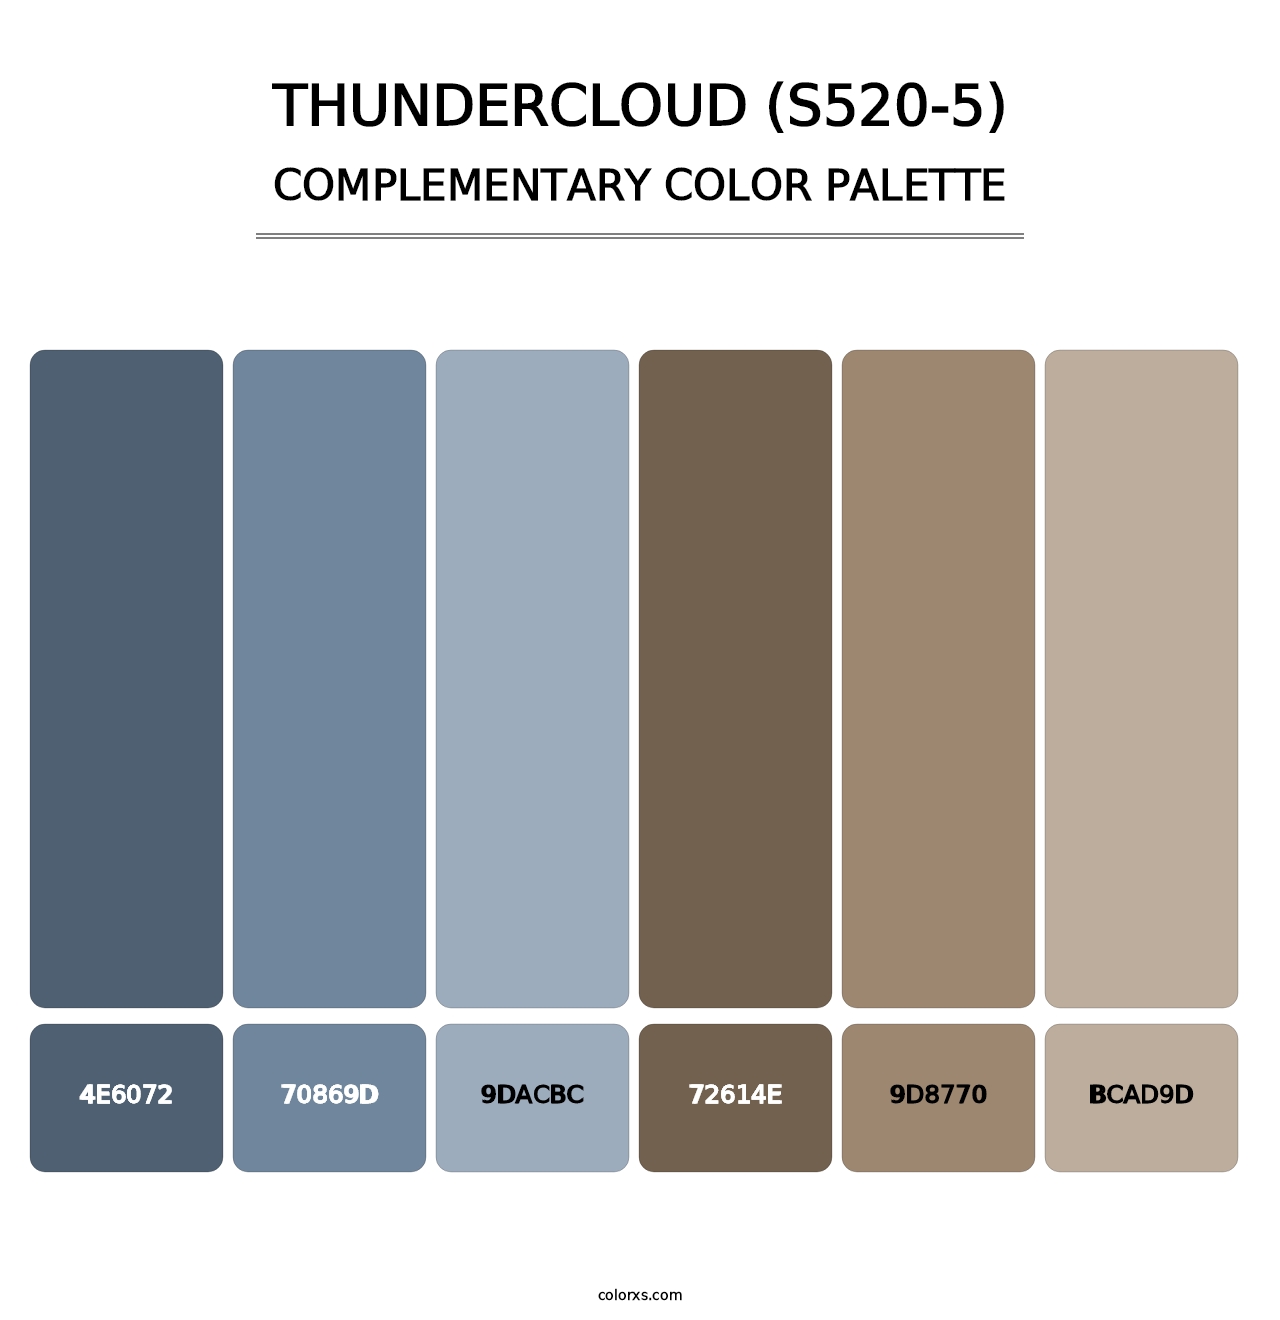 Thundercloud (S520-5) - Complementary Color Palette